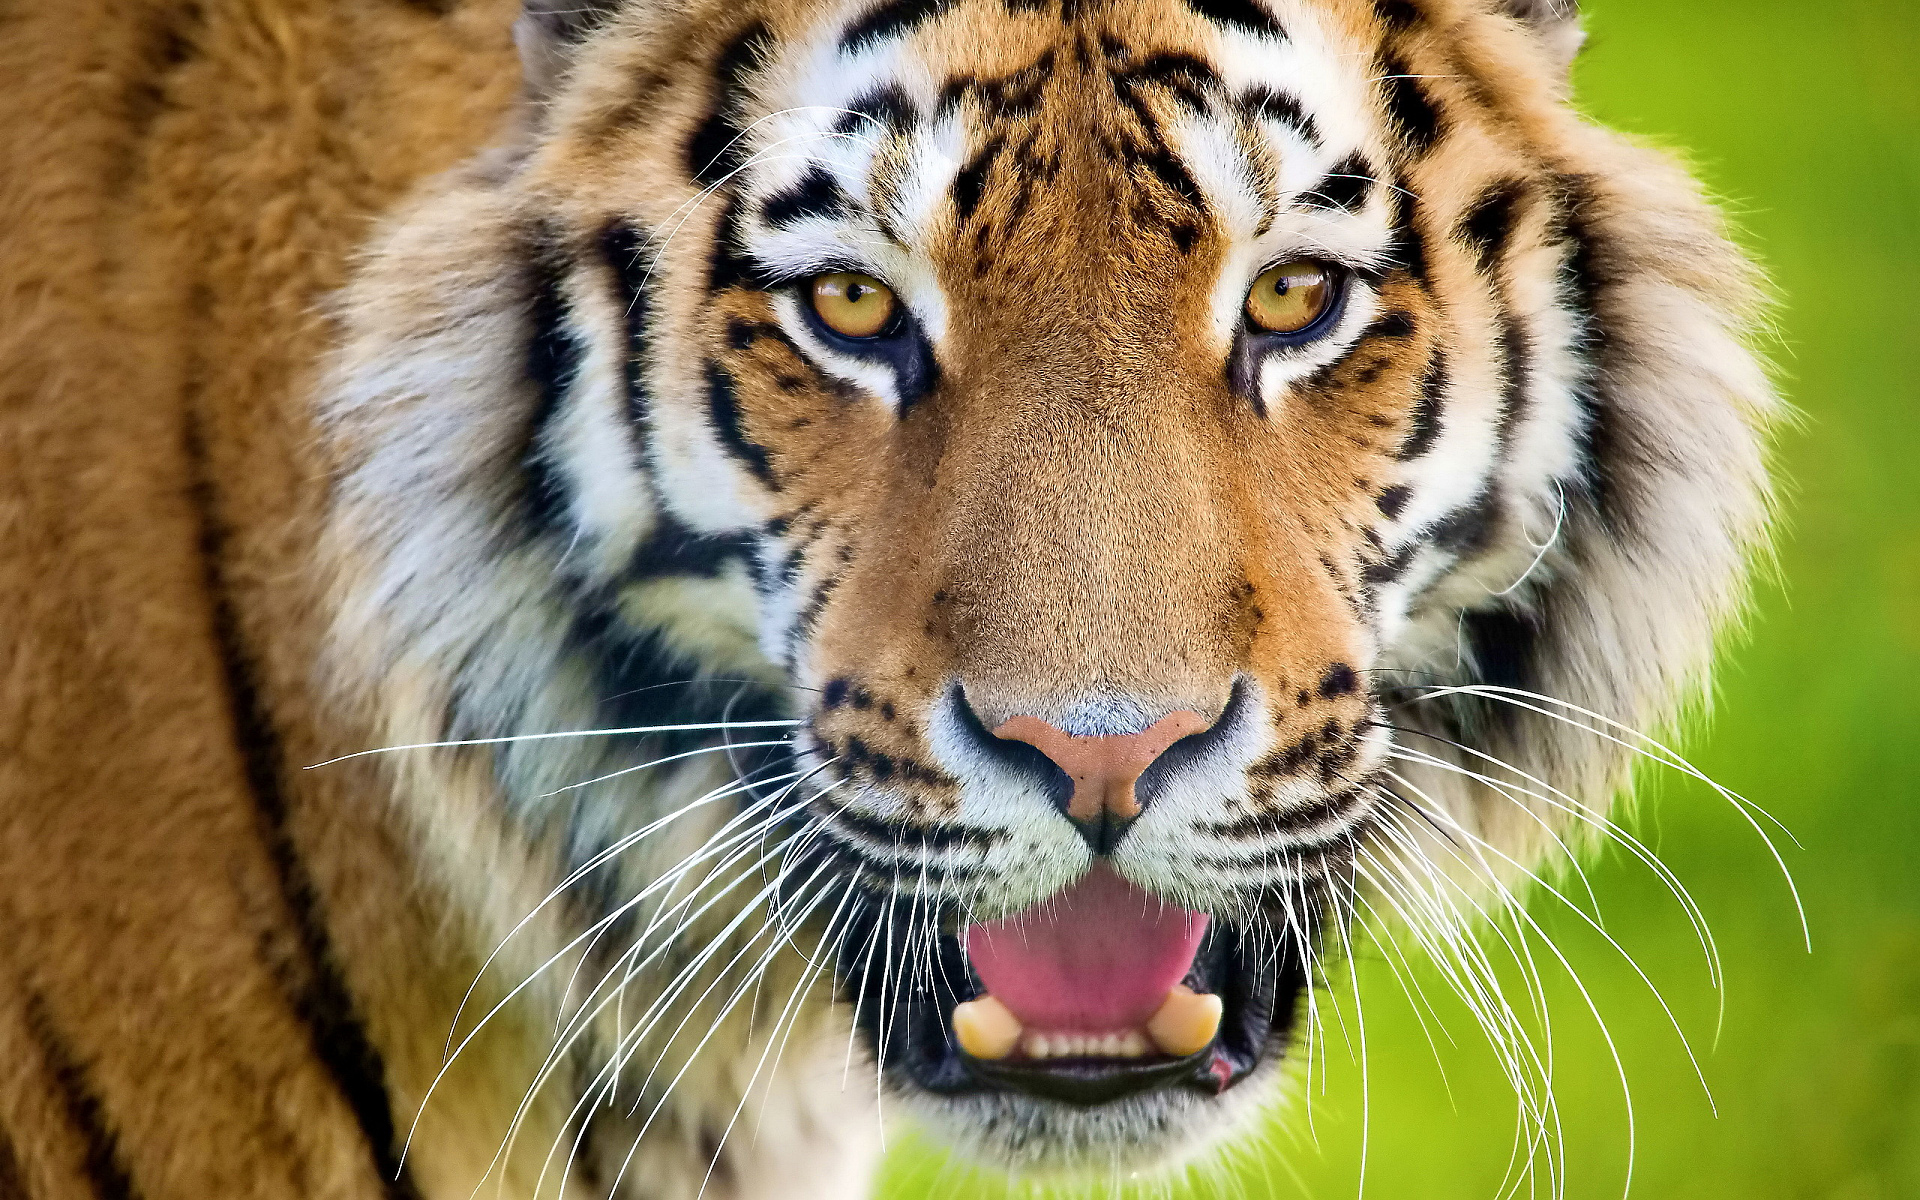 Tiger face wallpapers